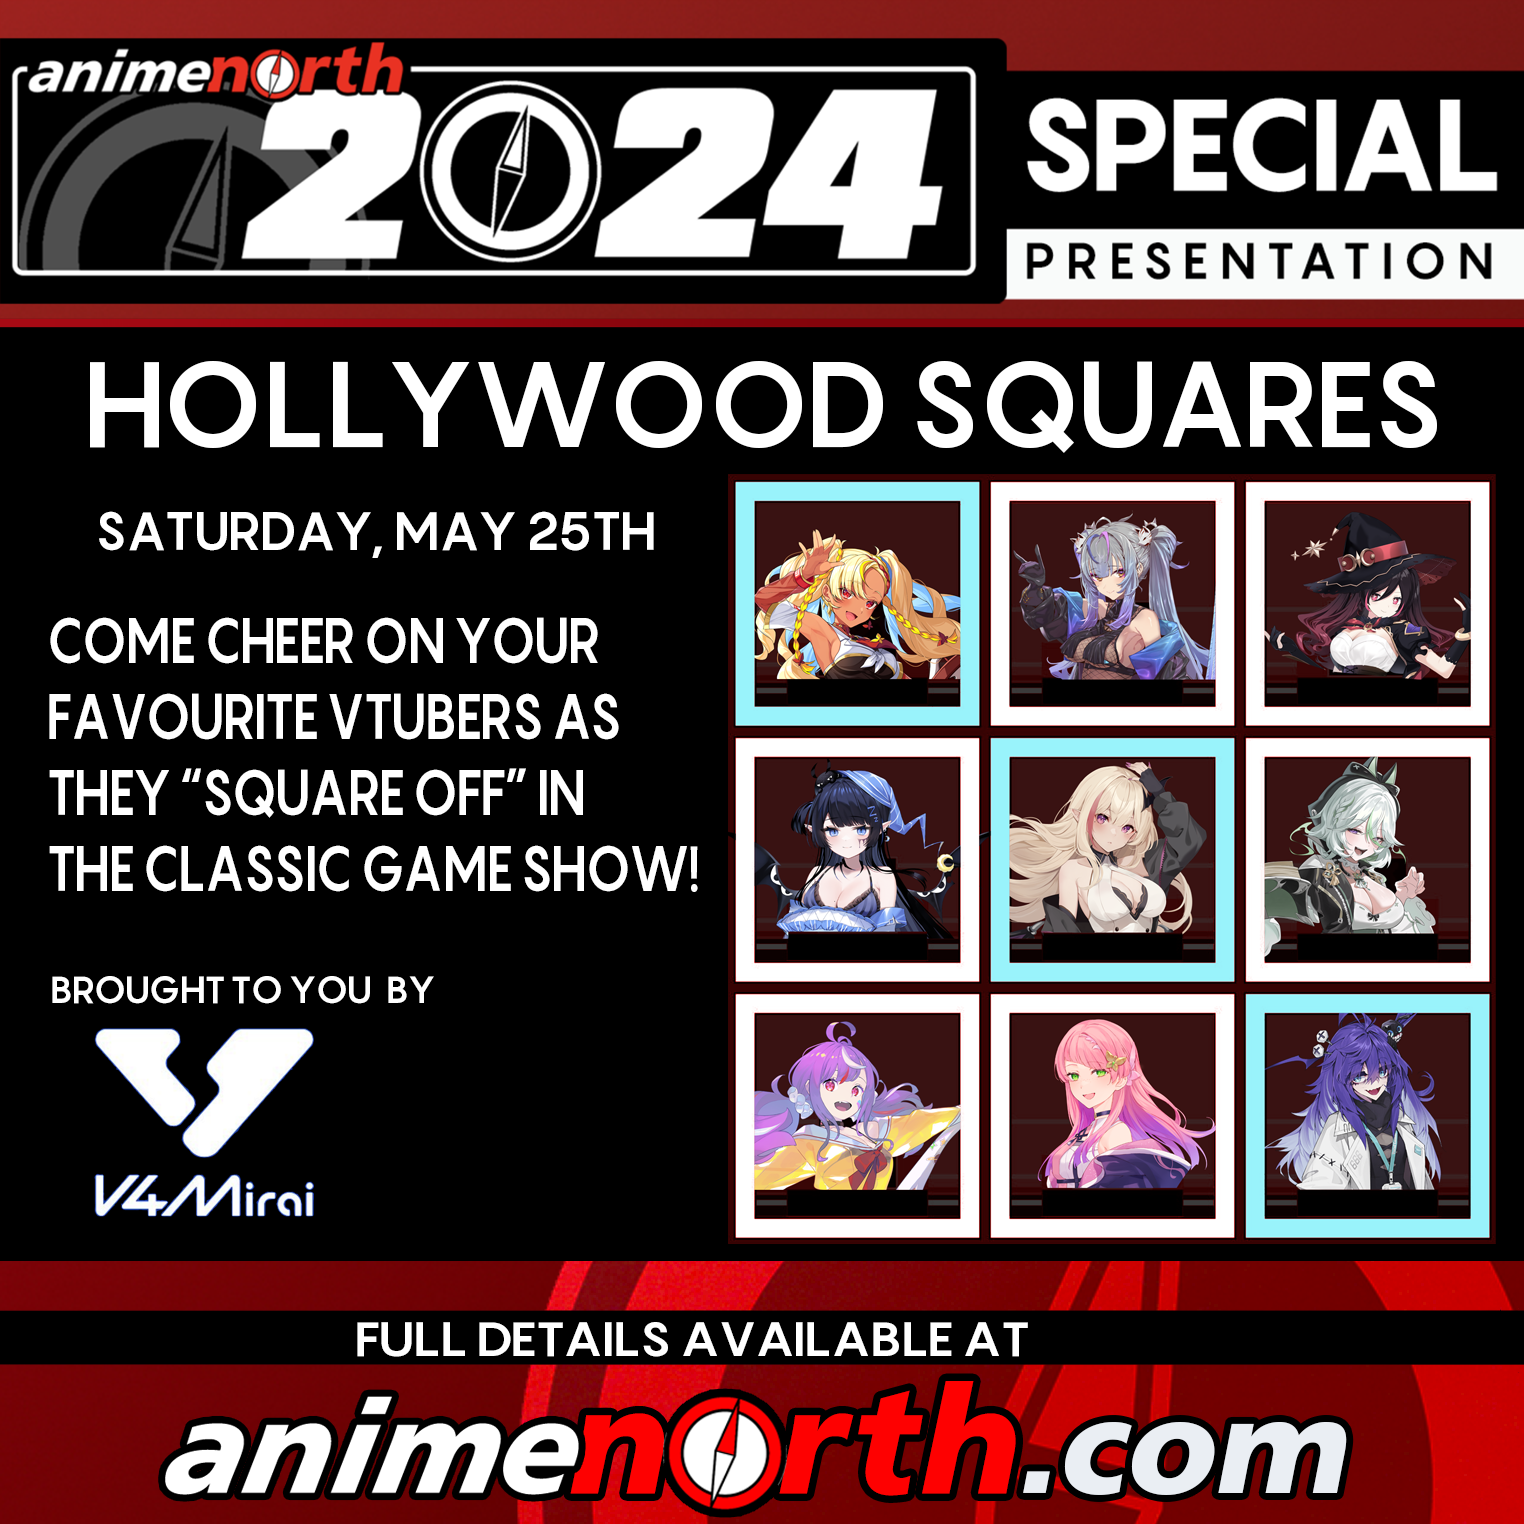 Hollywood Squares brought to you by V4Mirai